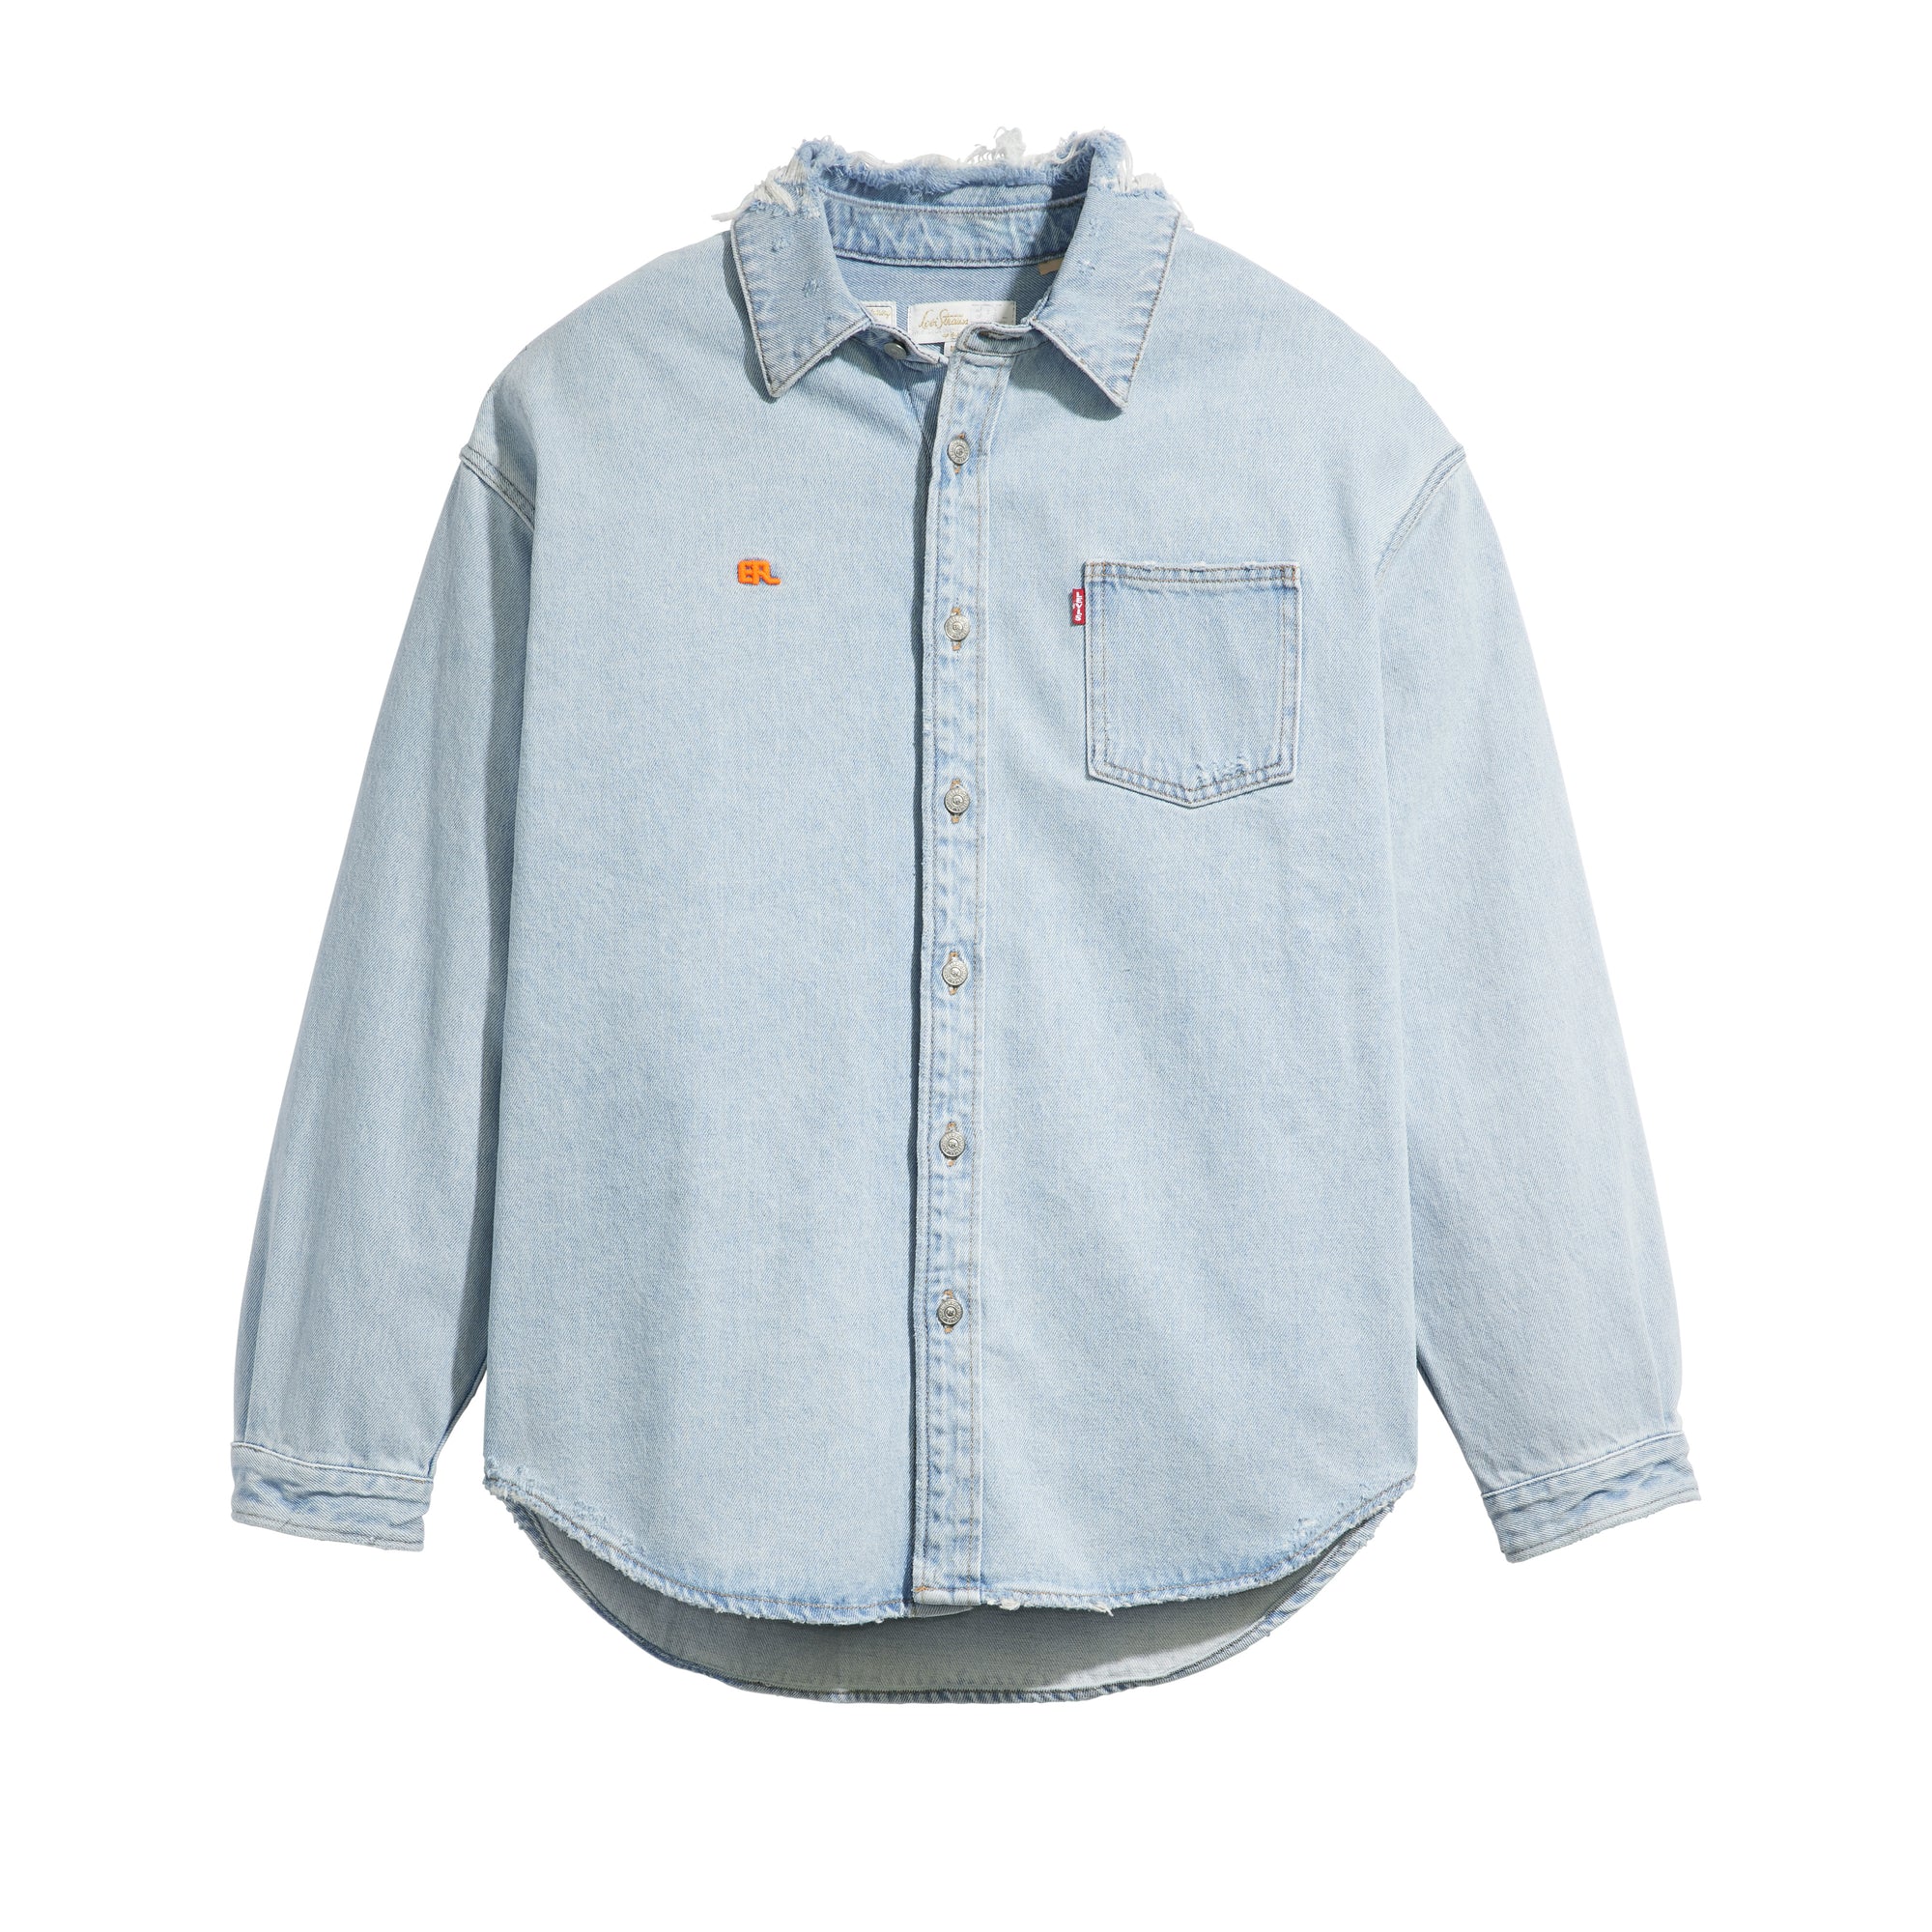 ERL - Levi’s Overshirt - (Blue) view 1